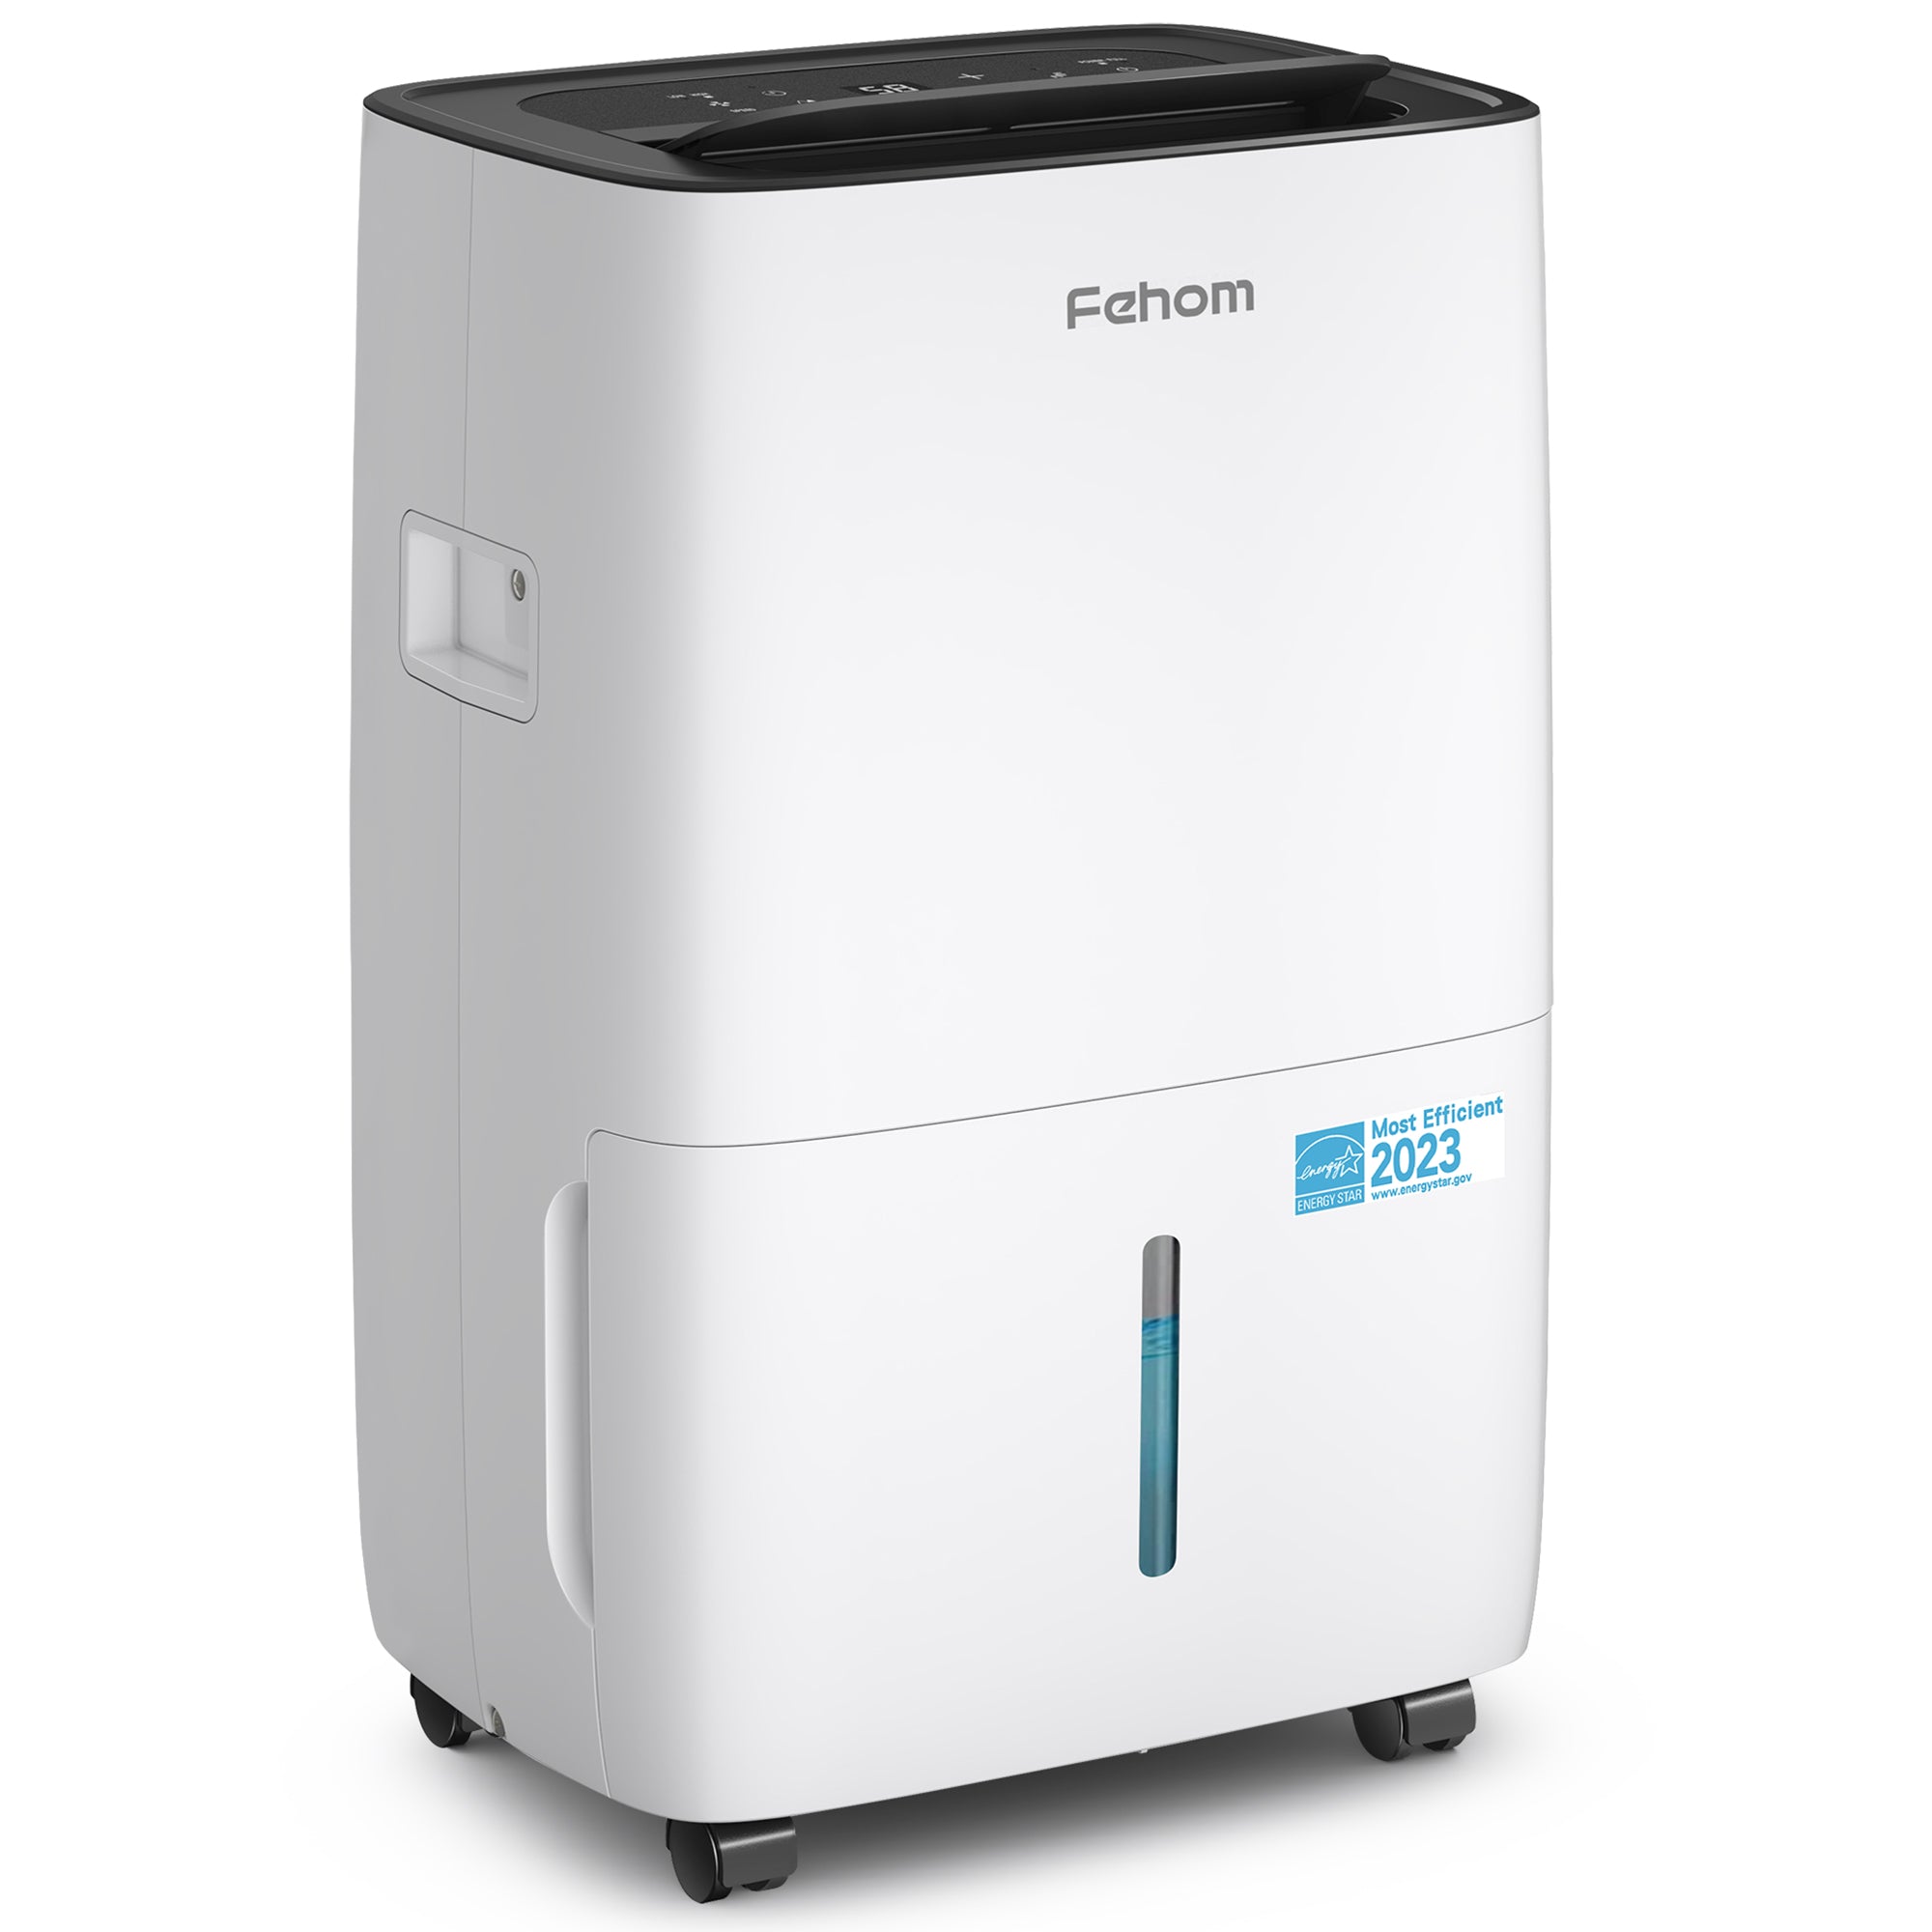 Fehom 80 Pints Dehumidifier Most Efficient 2023 Energy Star - 5,000 Sq. Ft Dehumidifier for Basement with Drain Hose and 1.06 Gal Water Tank, Smart Dehumidifiers for Home, Large Rooms(Model: JD025L-80)